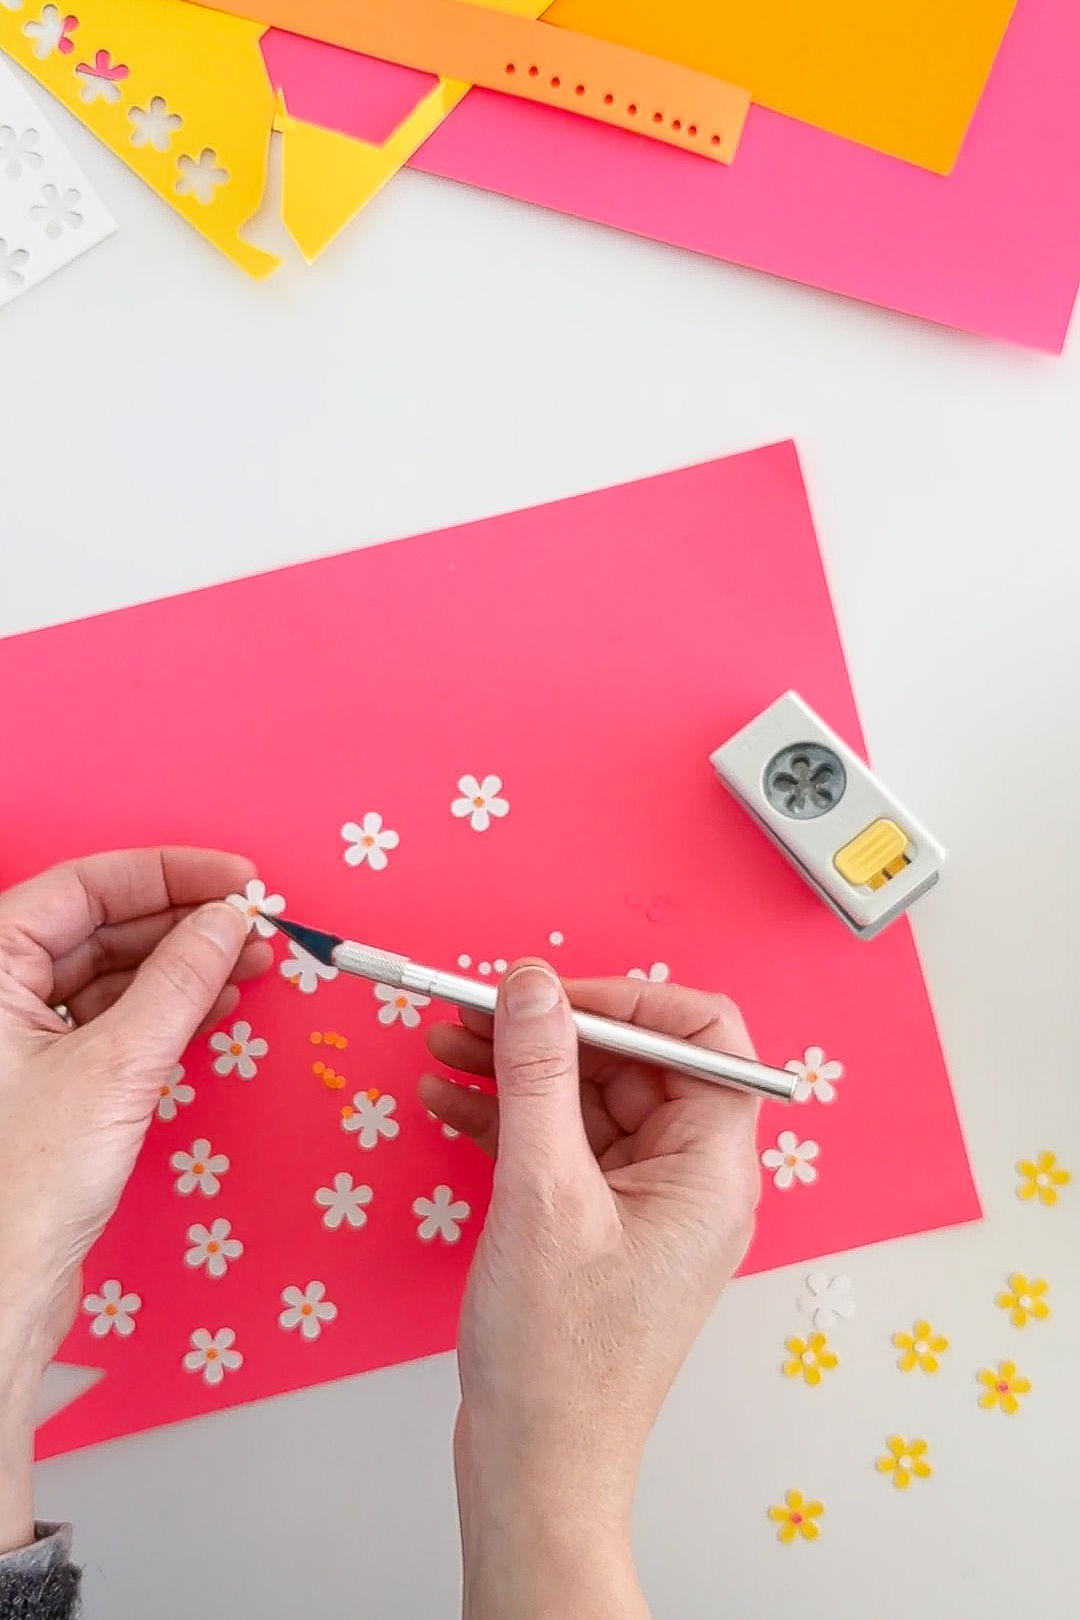 Gluing centers into the middle of paper flowers